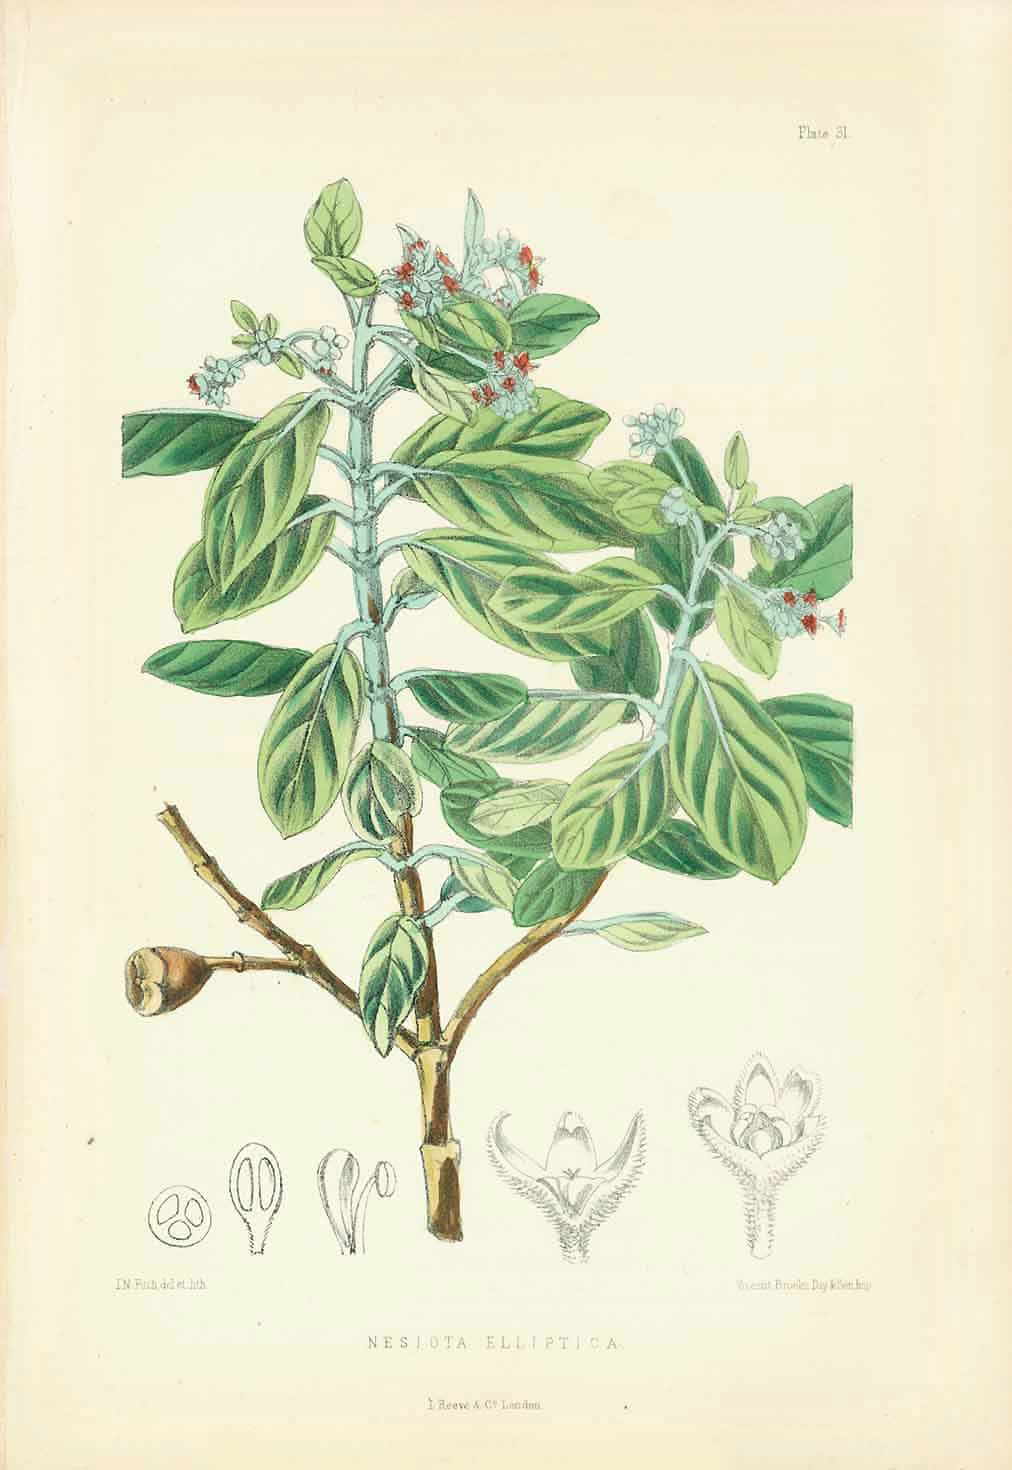 "Nesiota Elliptica"  Set of flowers indigenous to the Island of St. Helena in the South Atlantic.  All lithographs were printed in colour. Various artists.  Published in "St. Helena" by John Charles Melliss London, 1875